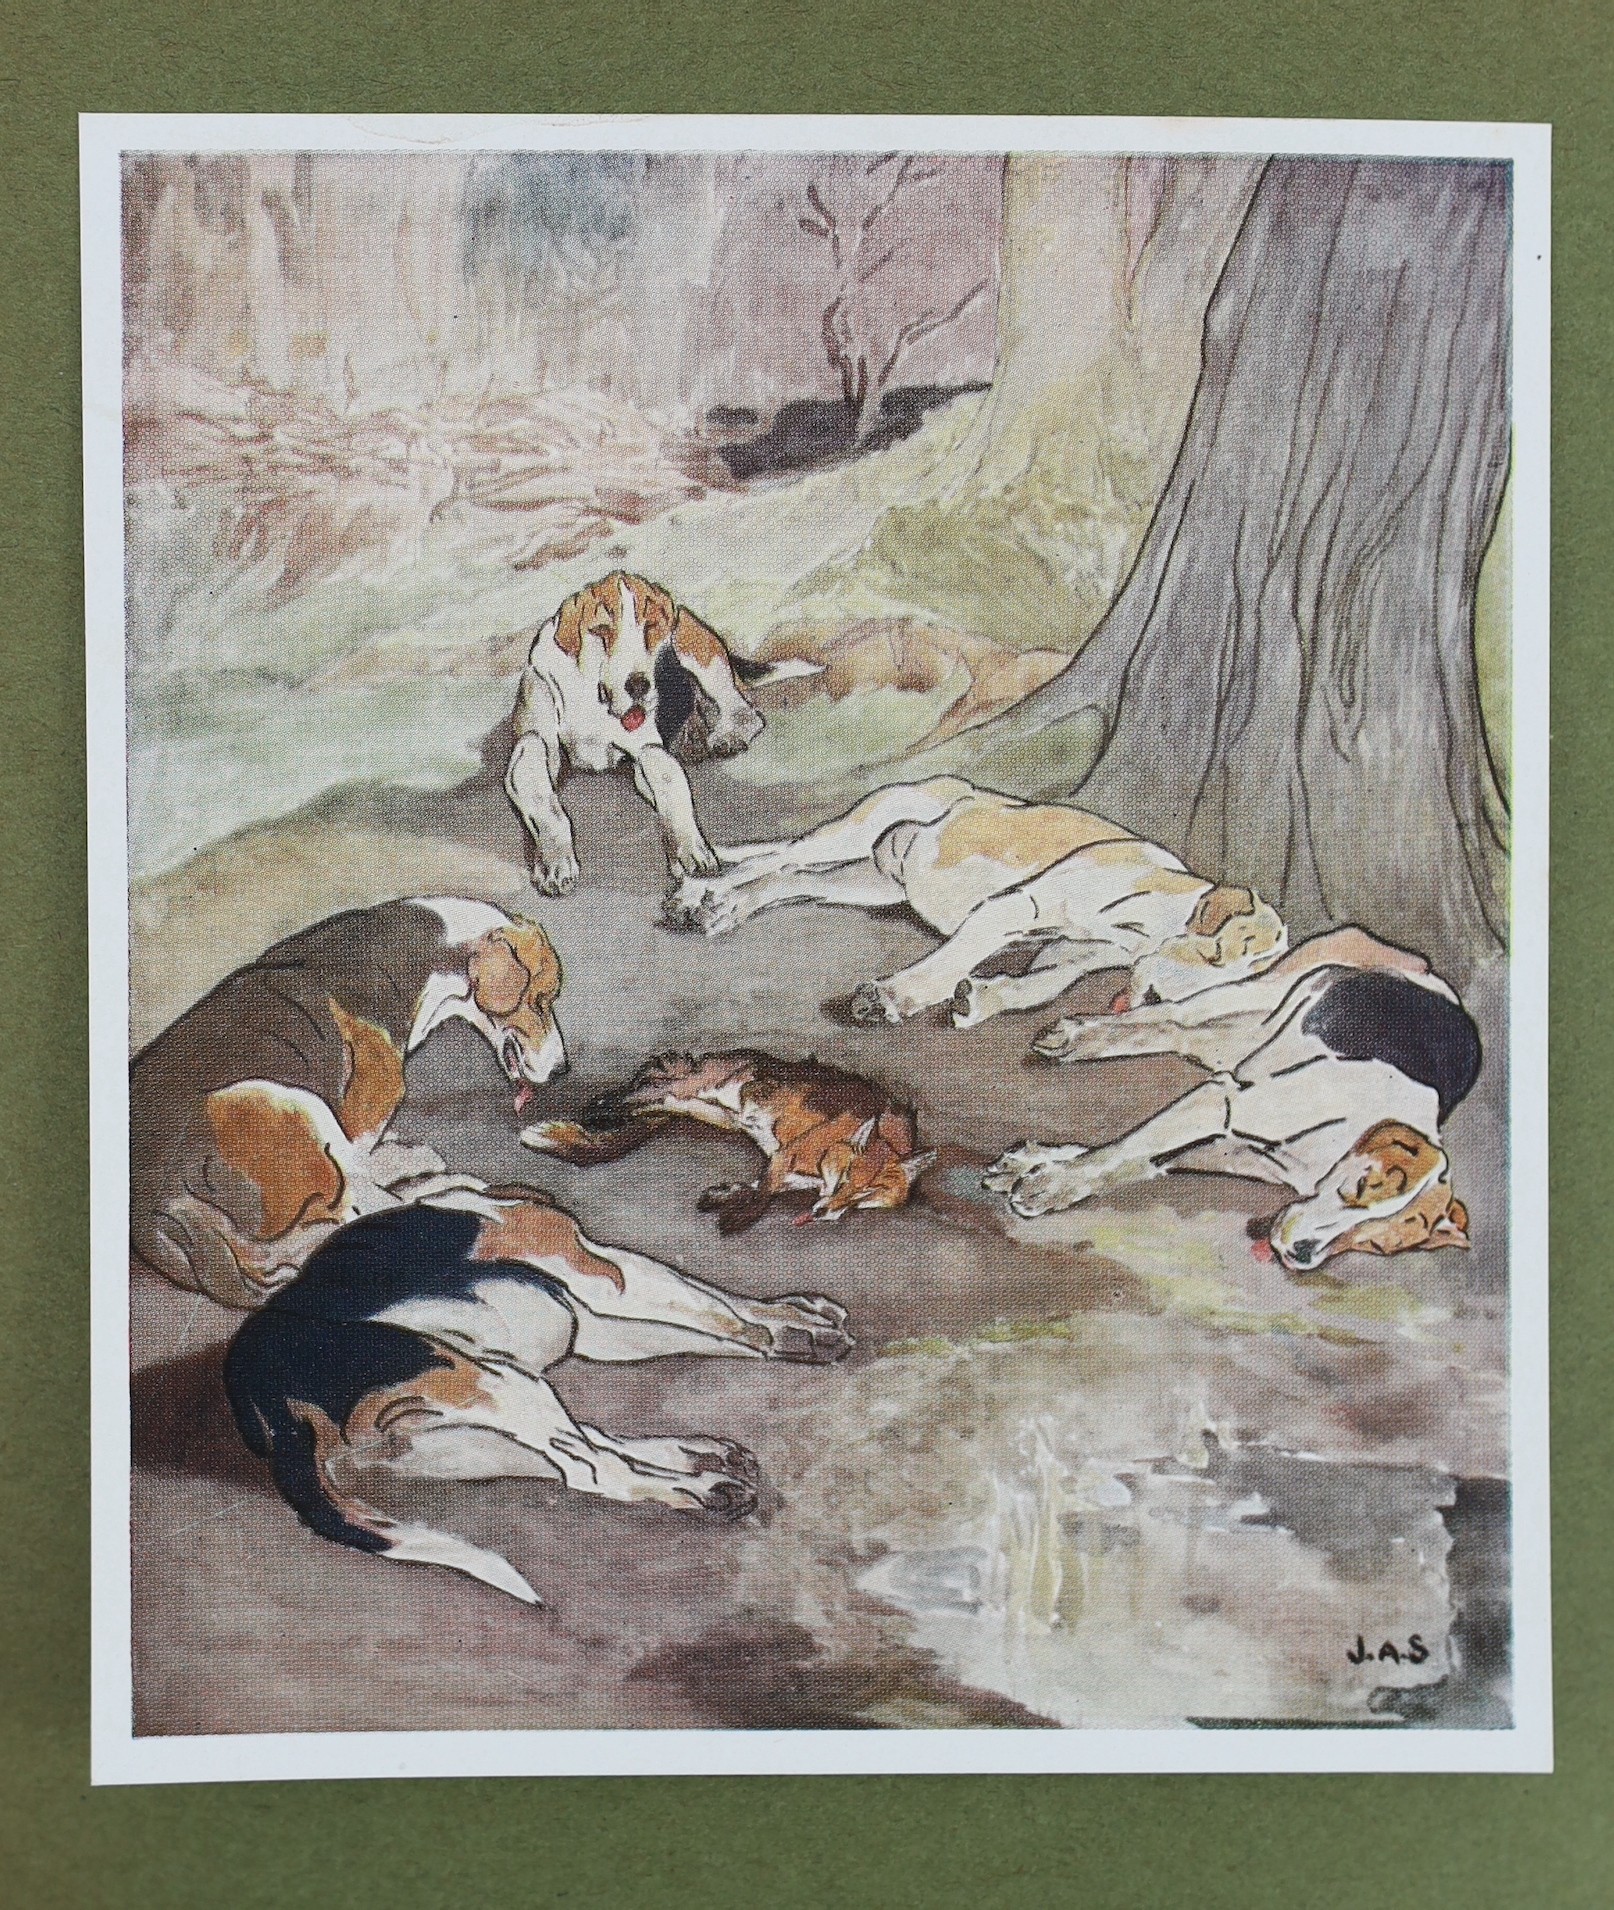 Mills, John - The Life of a Foxhound, illustrated by J.A. Shepherd, 8vo, vellum gilt, with 8 tipped-in colour plates, Hodder and Stoughton, London, c. 1921 and Partridge, John - Merlinus Liberatus: Being and Almanack for